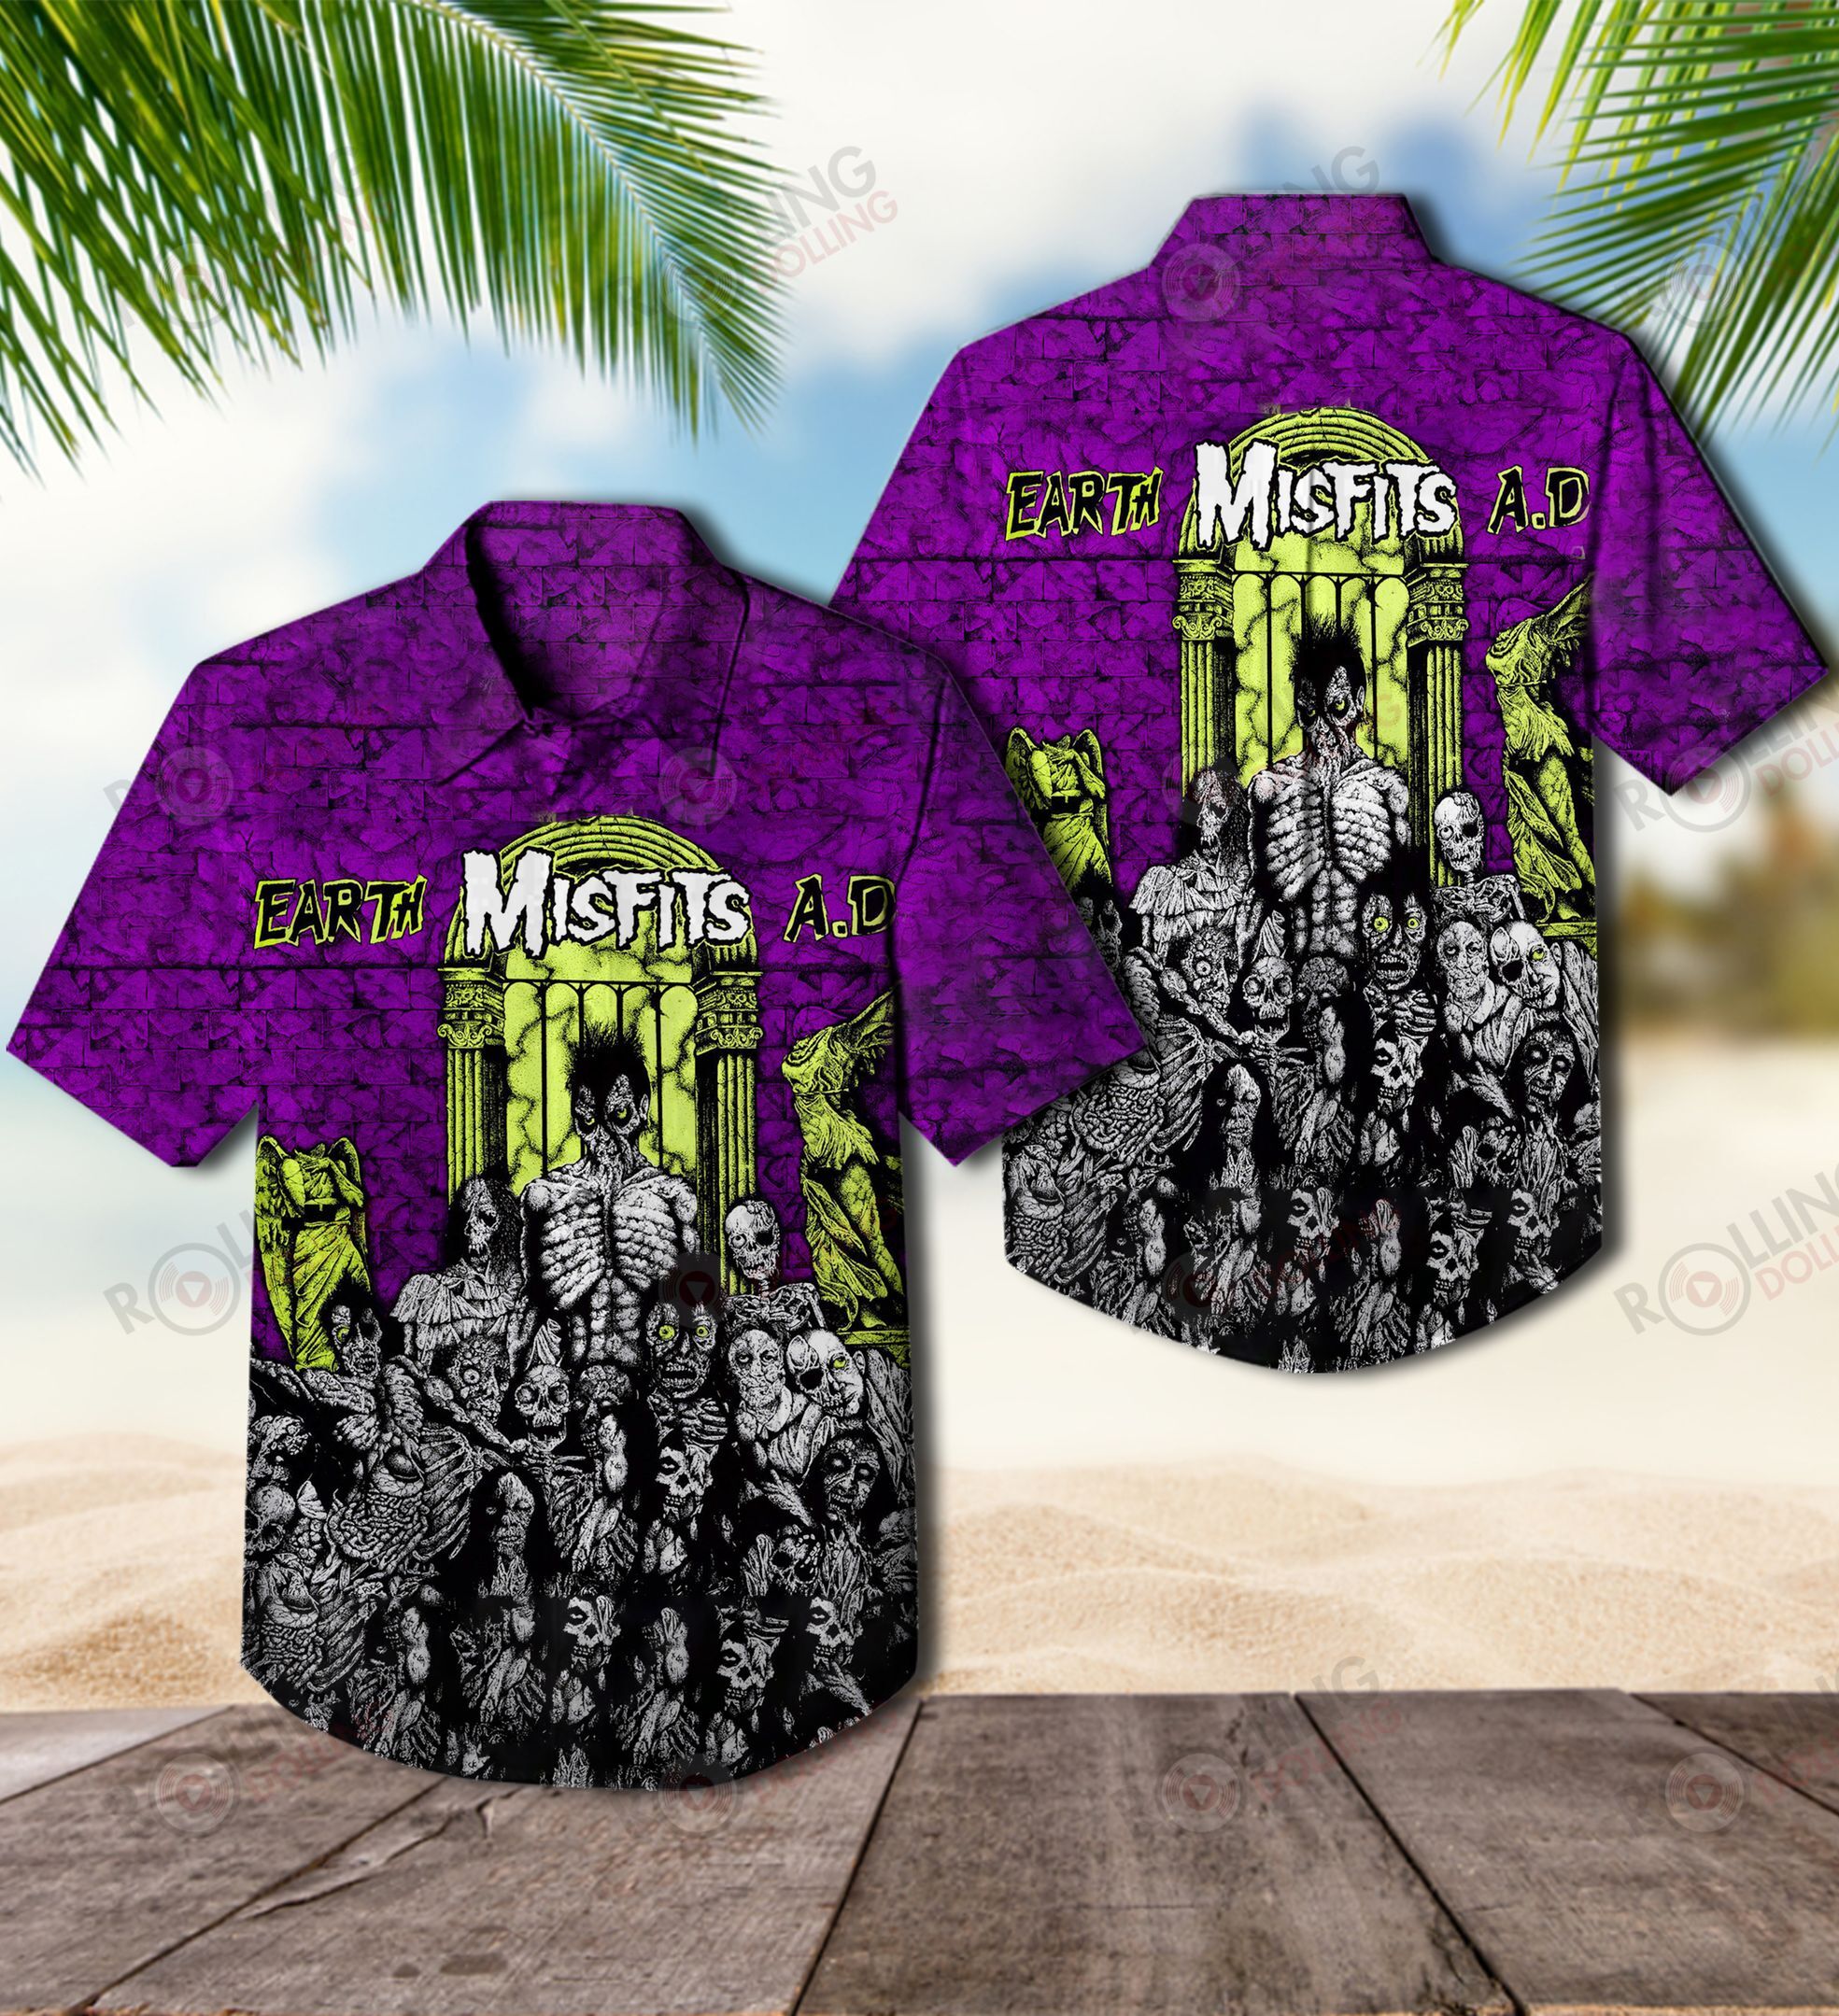 This would make a great gift for any fan who loves Hawaiian Shirt as well as Rock band 21